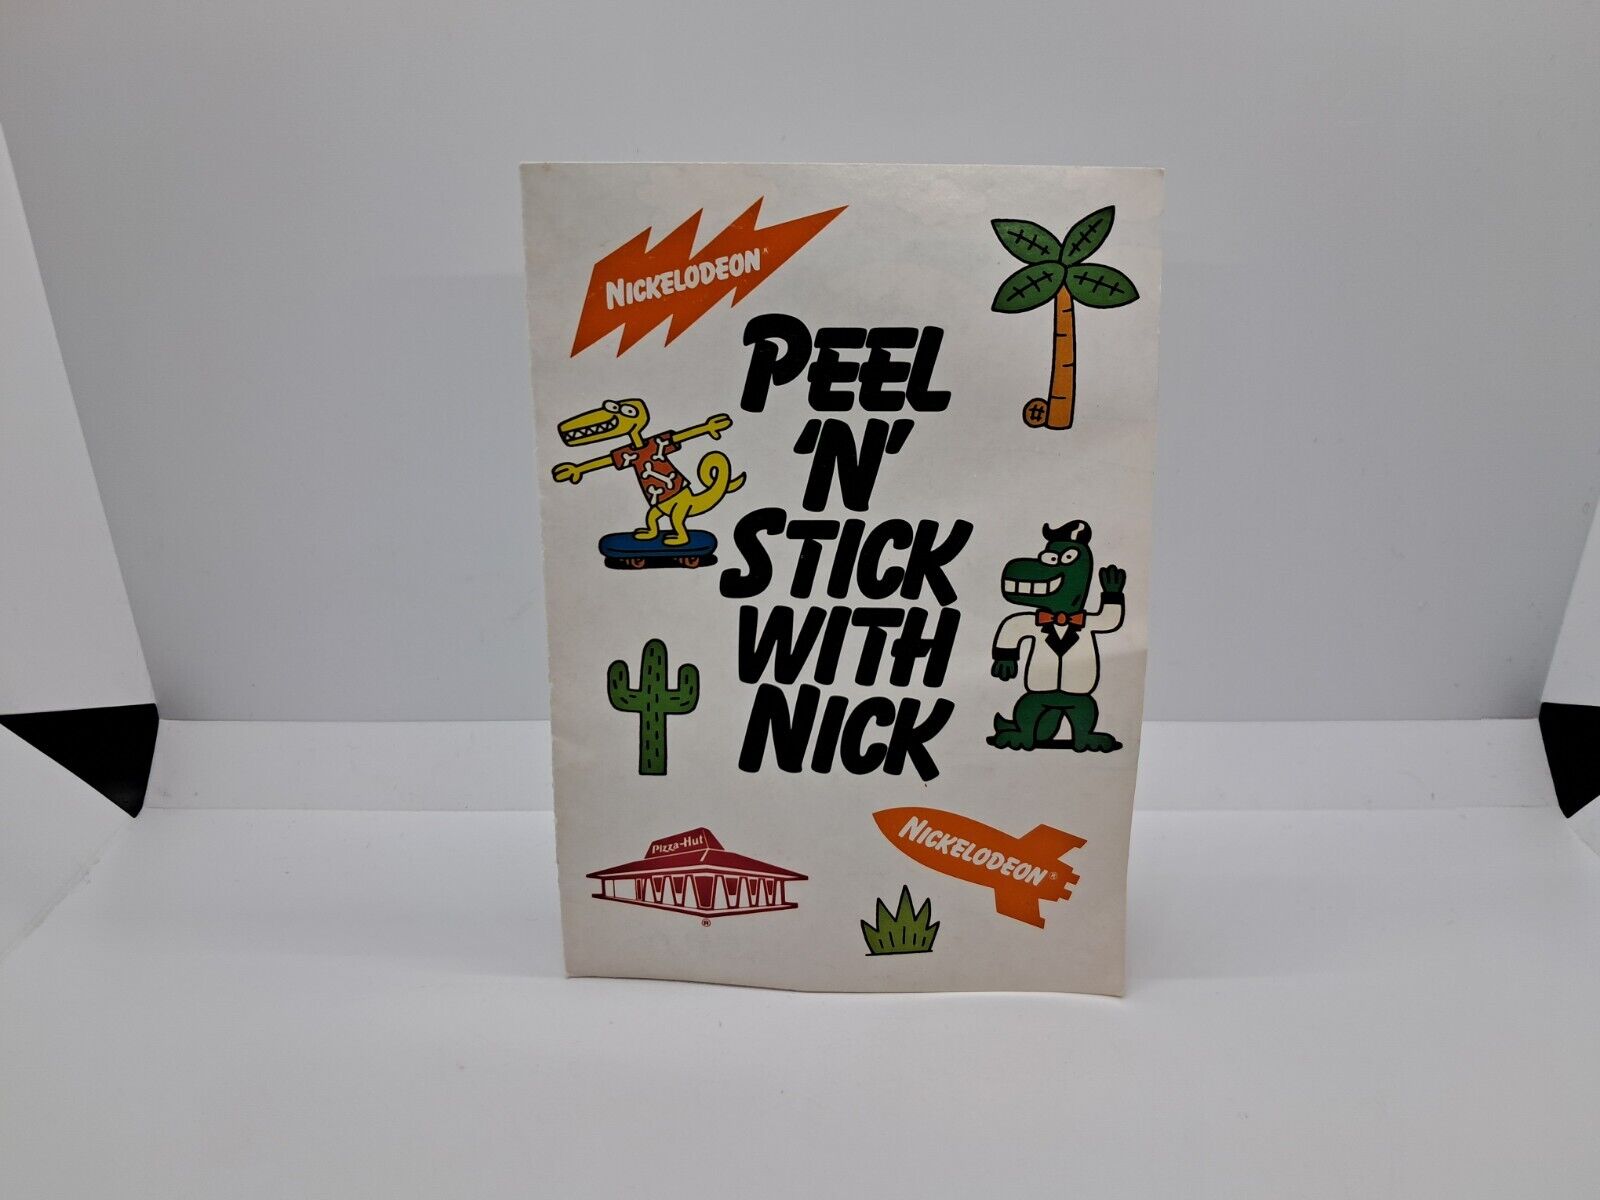 Vintage Pizza Hut Peel N Stick With Nick 1990 Nickelodeon Activity Trifold